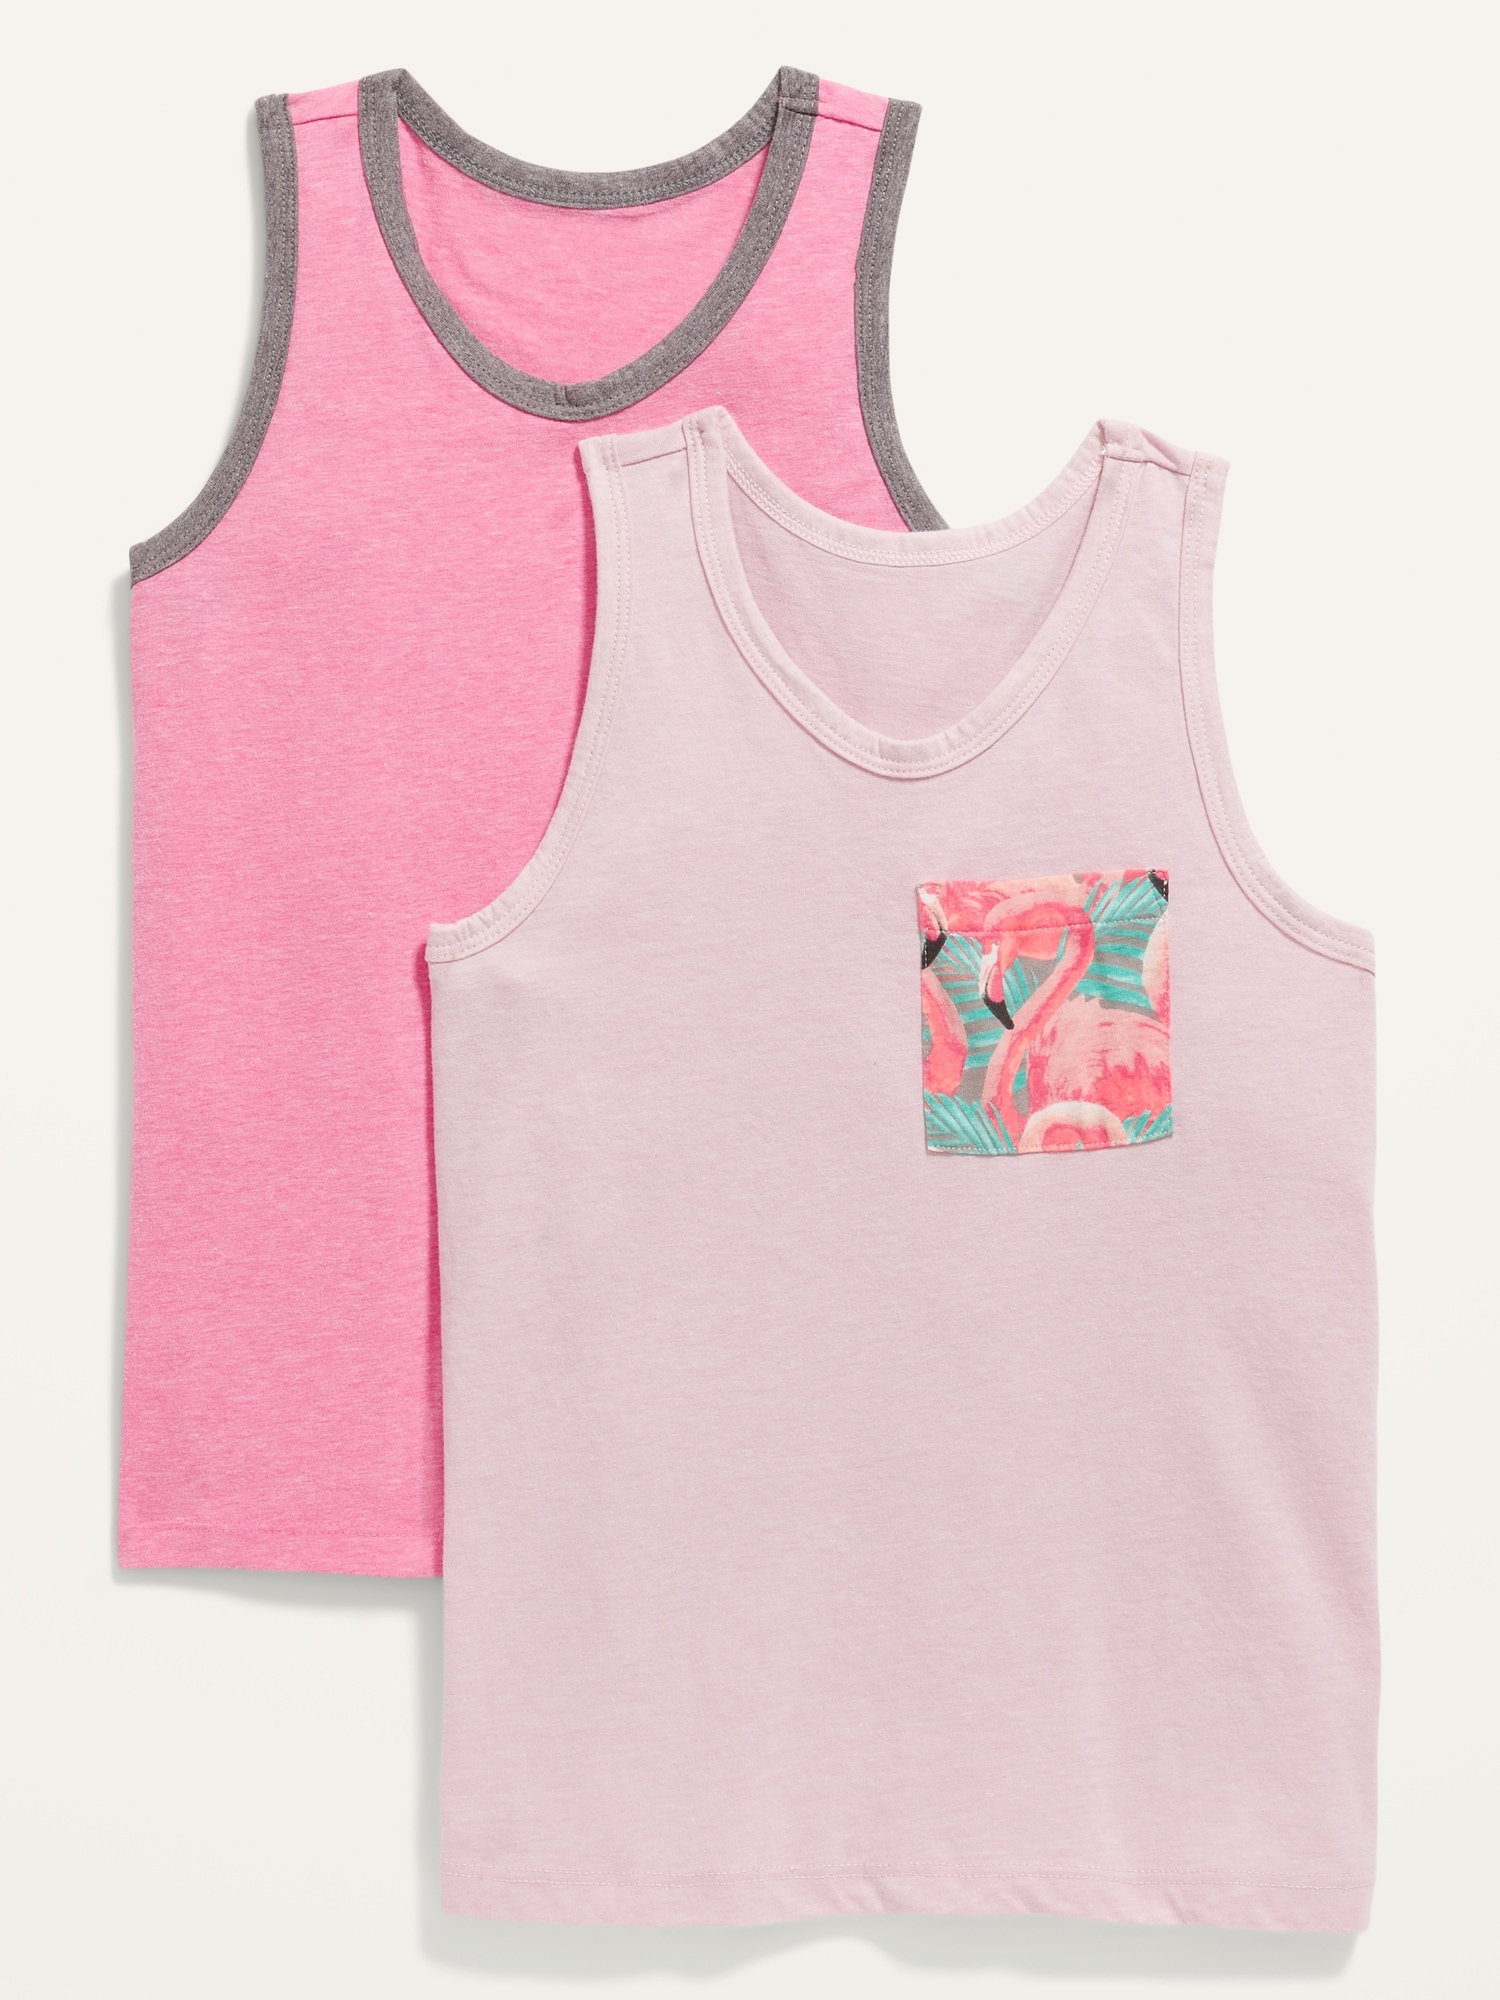 Old Navy Softest Tank Tops 2-Pack for Boys pink. 1